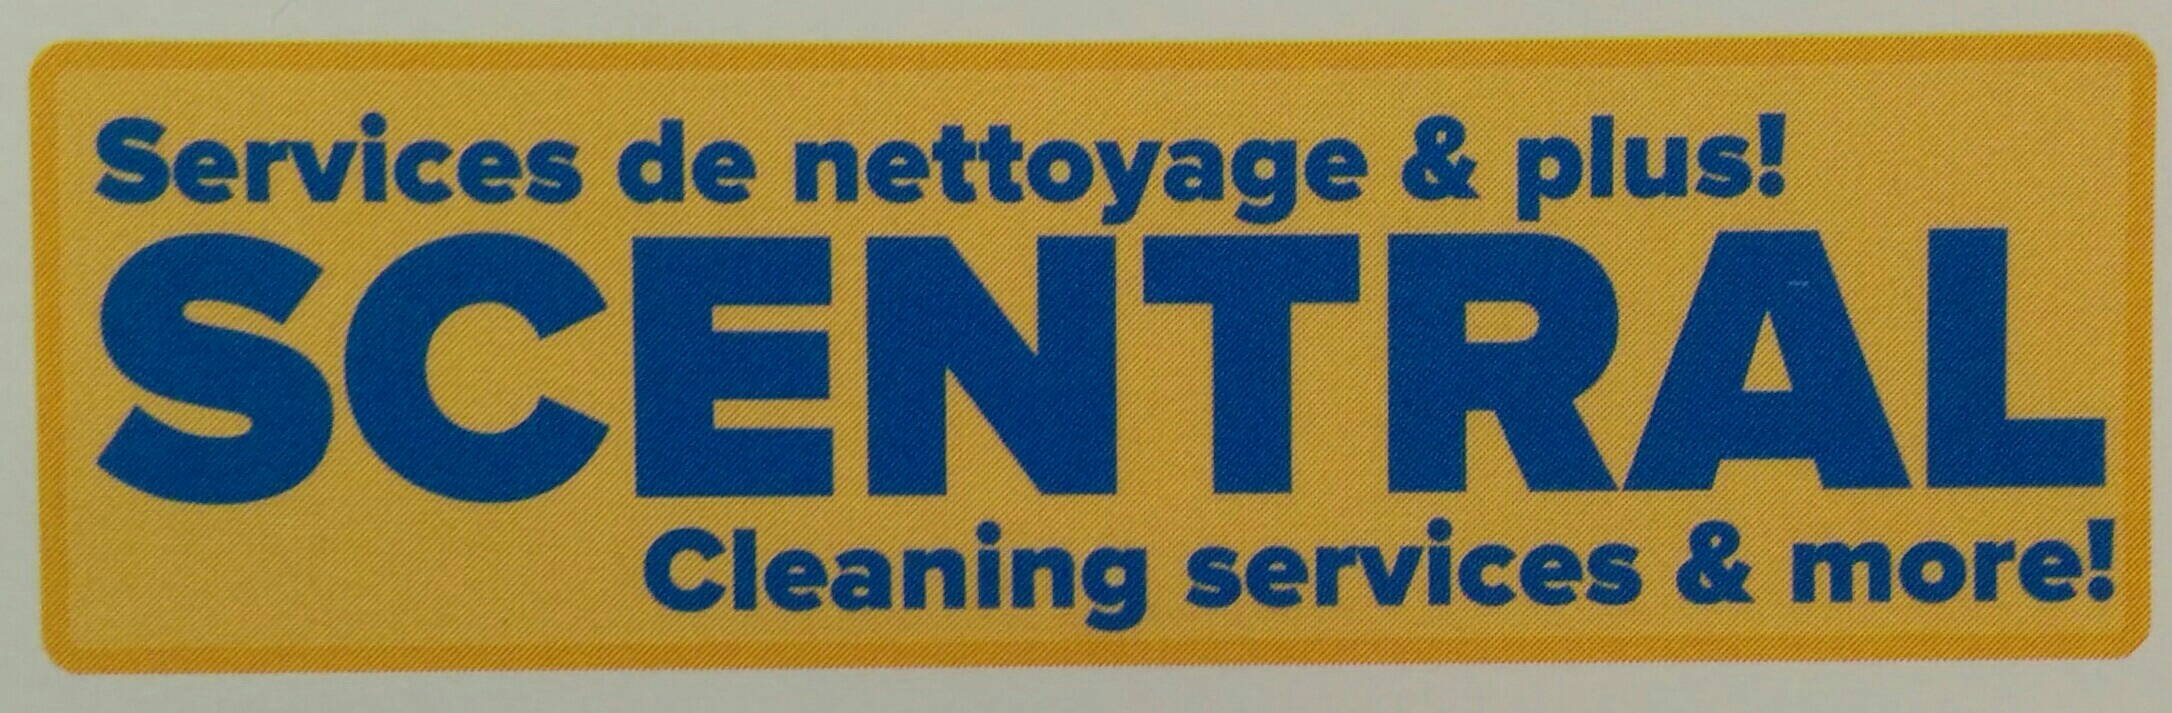 SERVICES DE NETTOYAGE scentral CLEANING SERVICES - General Cleaner